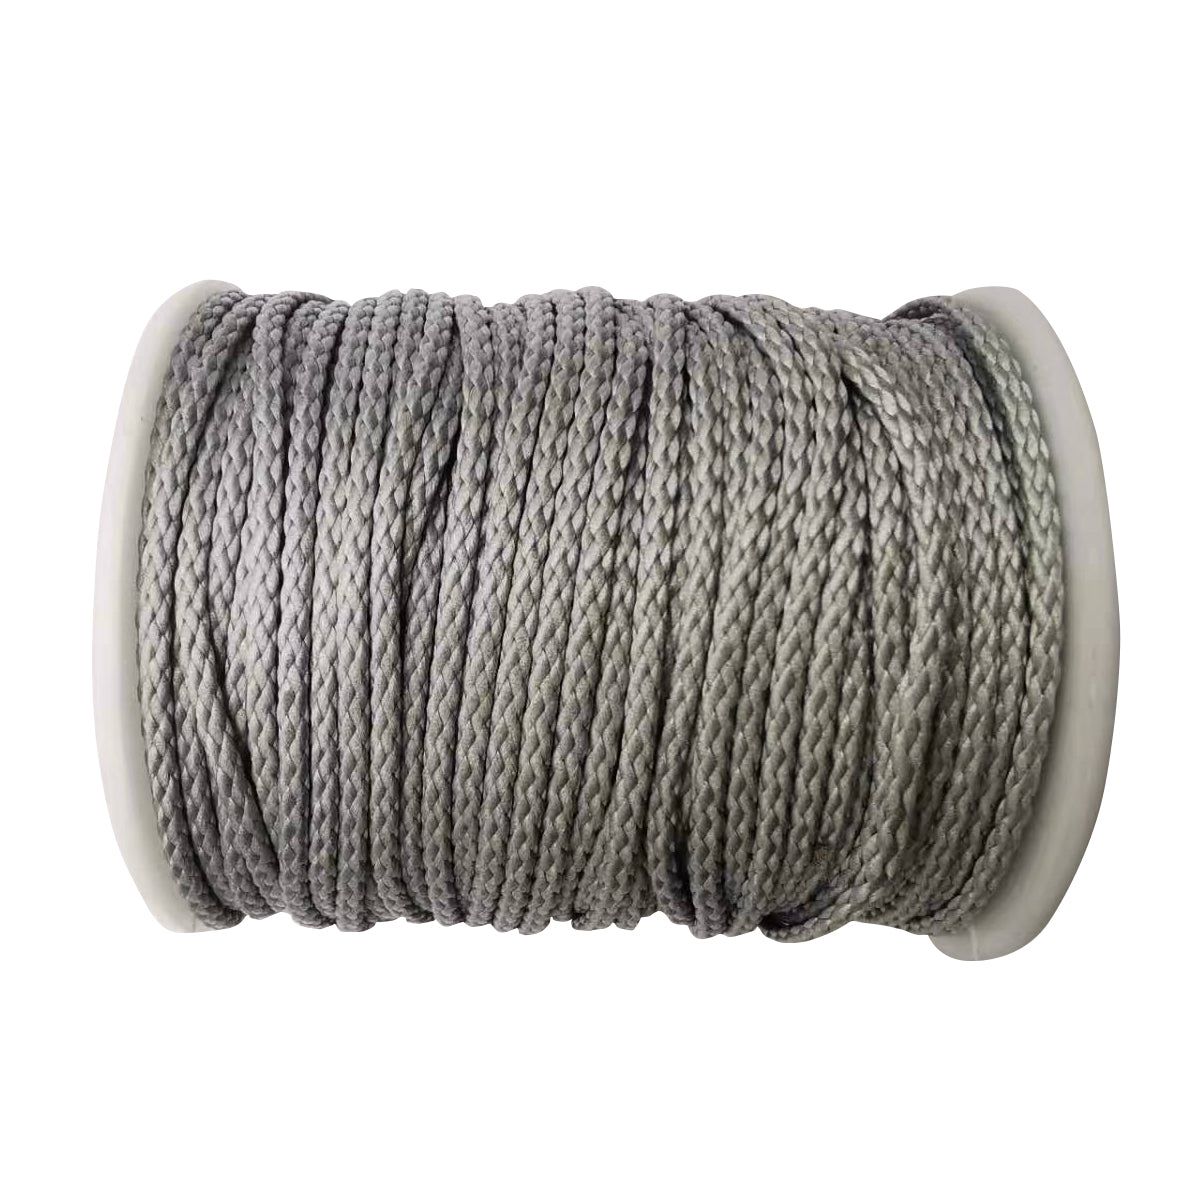 Amsteel Rope | Onewind Outdoors